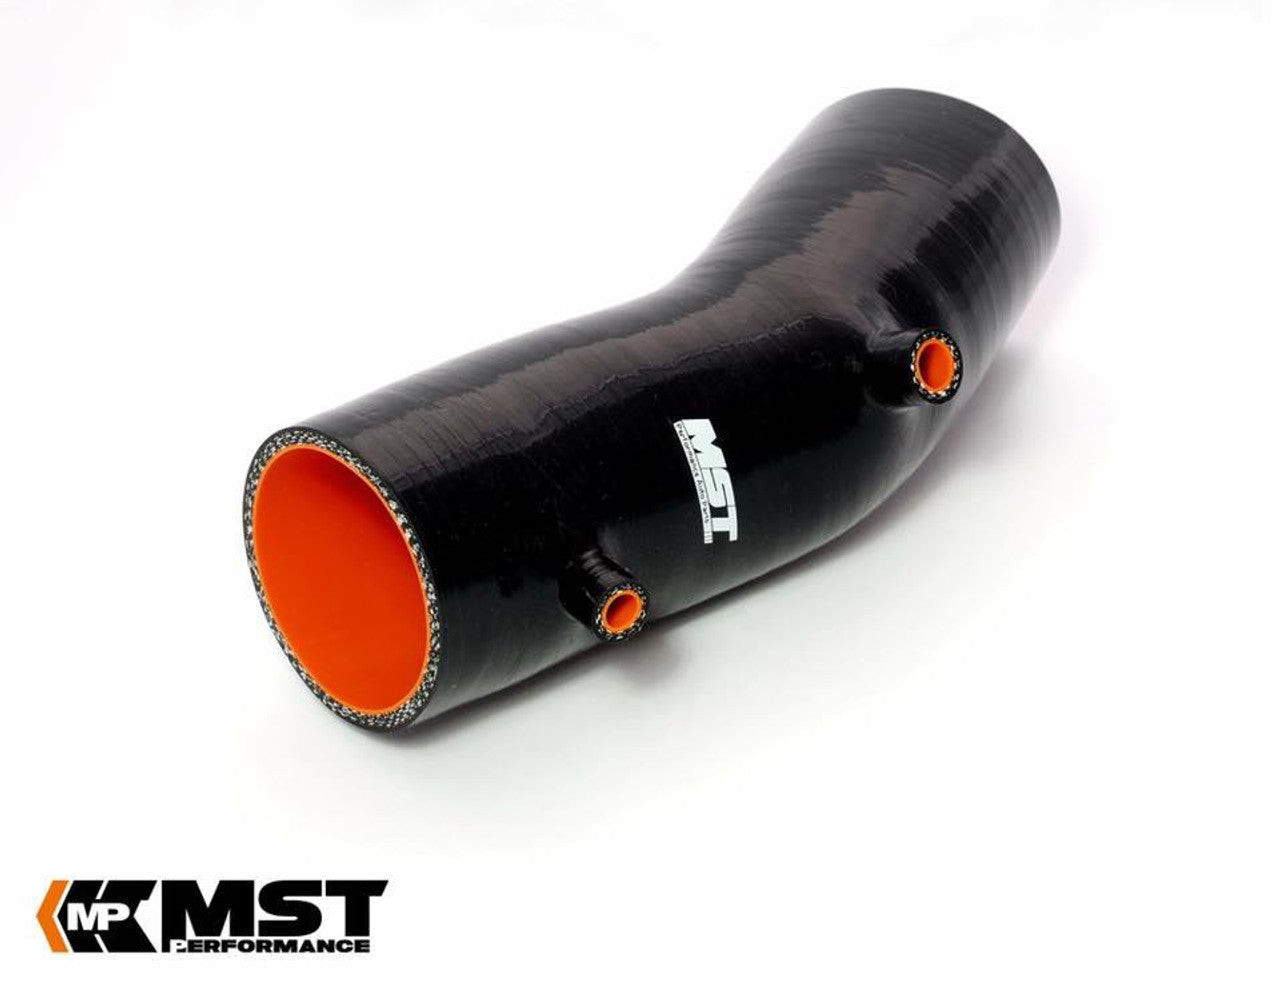 MST Performance Inlet Pipe For MK3 Focus 1.5T-MST Induction Kits-carbonizeduk